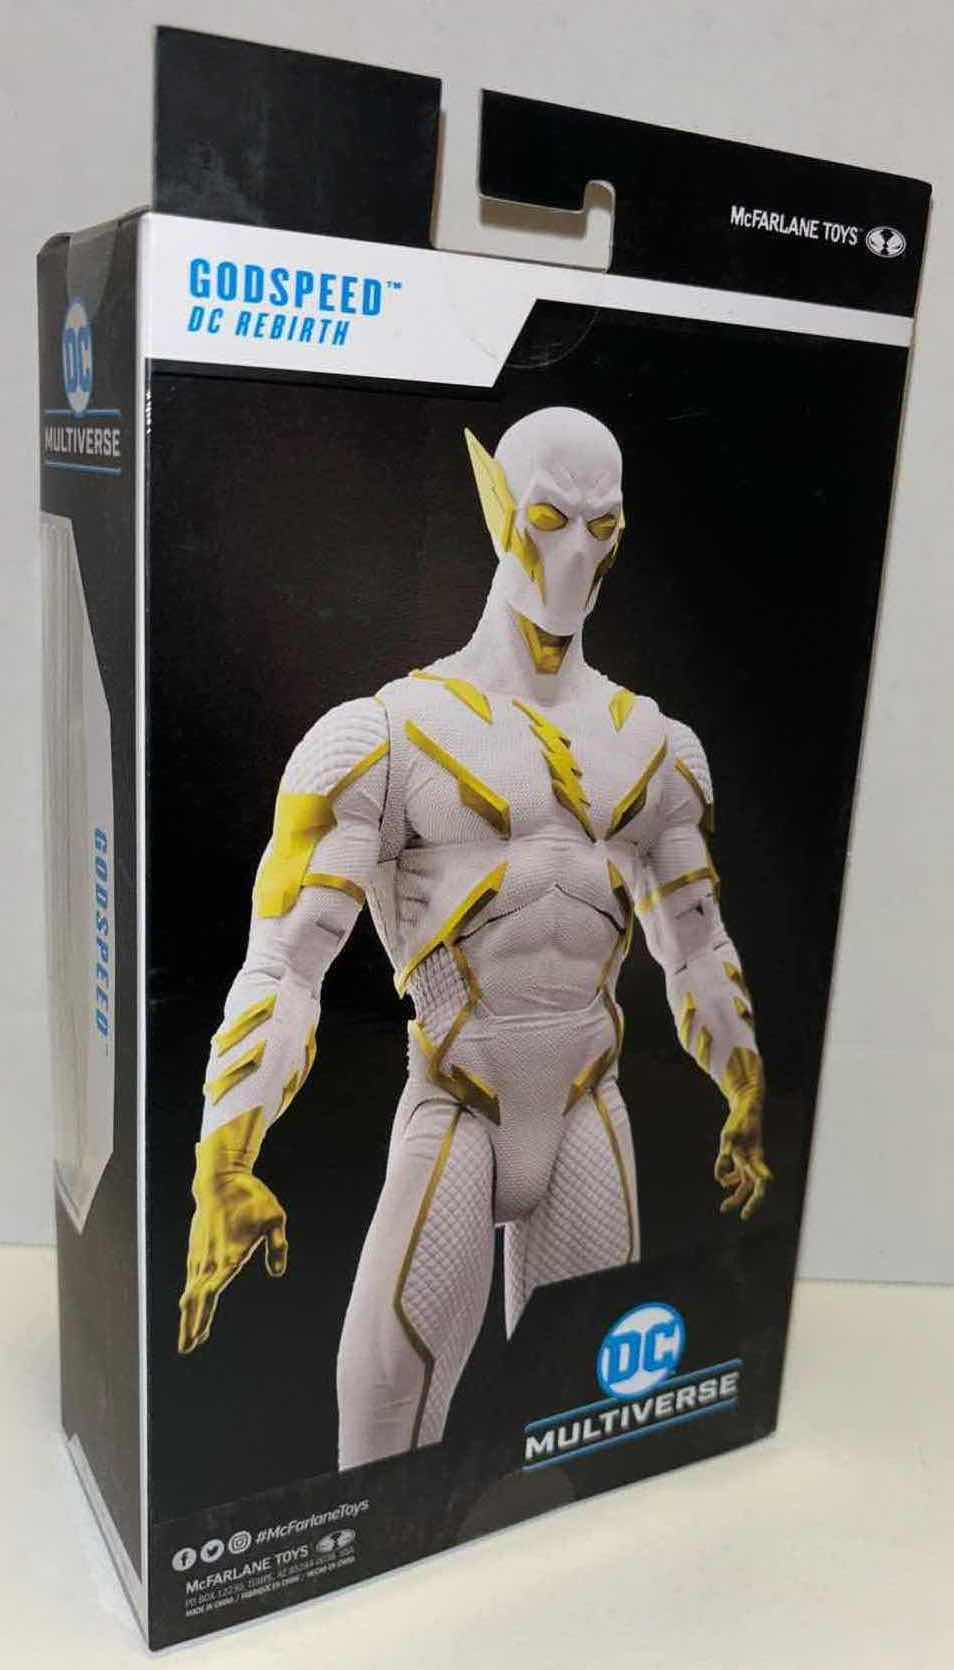 Photo 4 of NEW MCFARLANE TOYS DC MULTIVERSE ACTION FIGURE & ACCESSORIES, DC REBIRTH “GODSPEED”